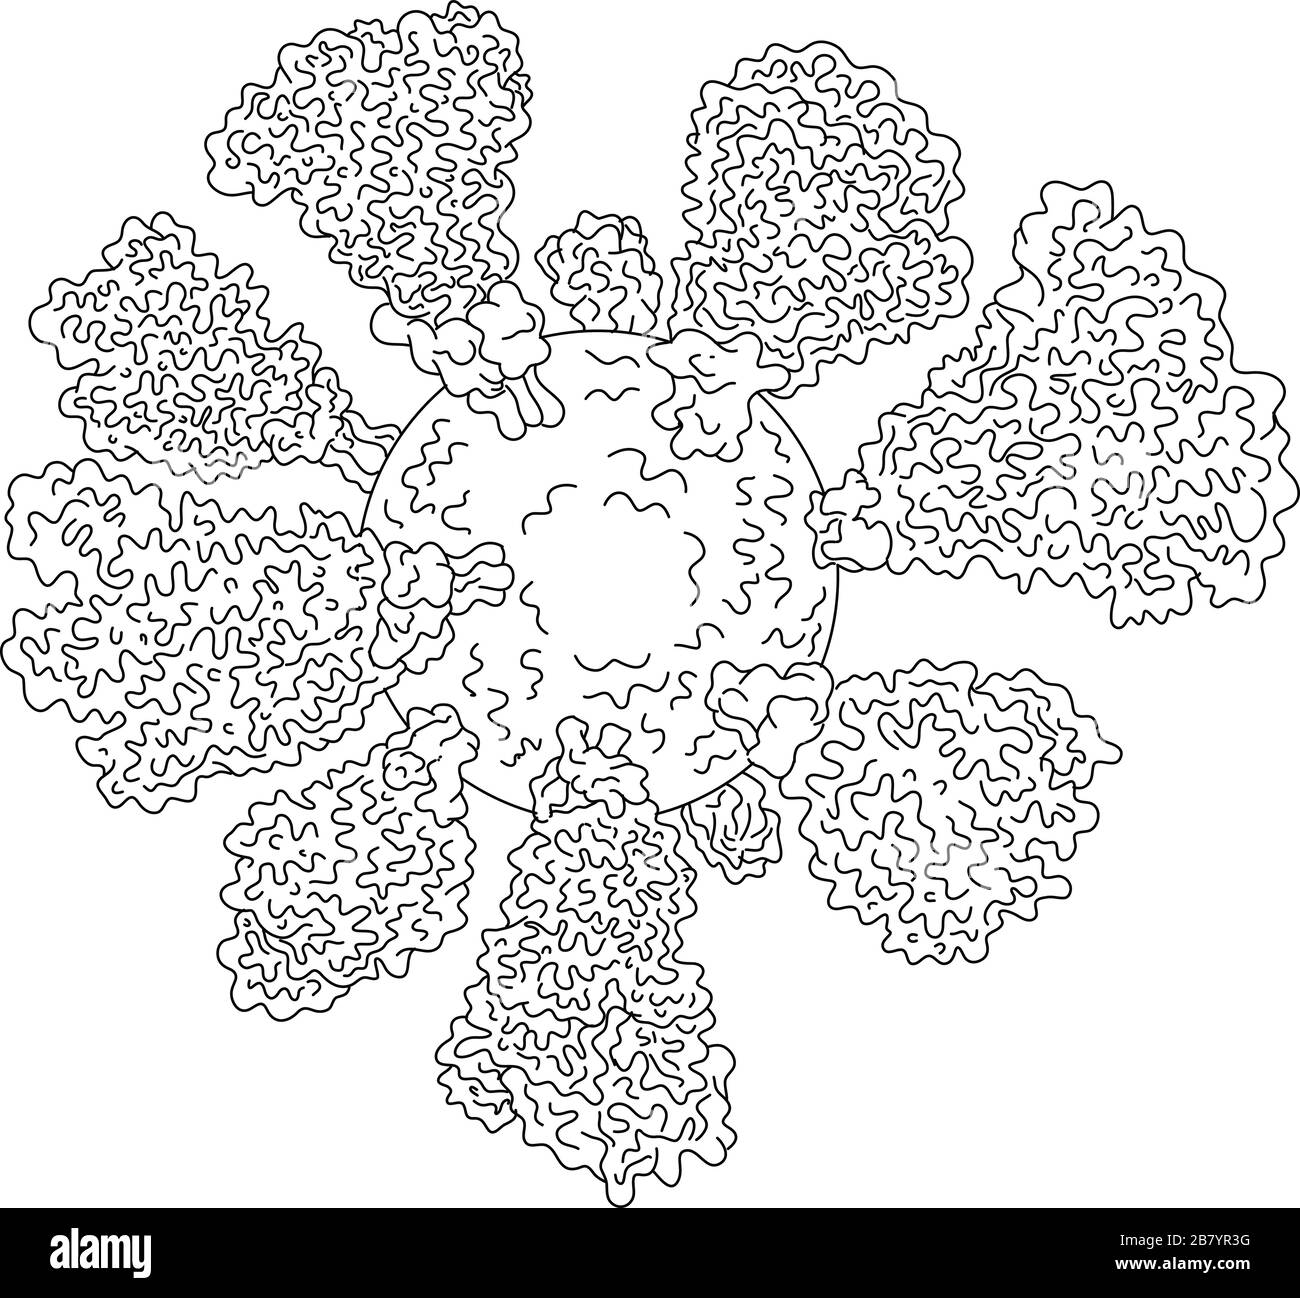 Line drawing illustration of a microscopic cryo-electron coronavirus, COVID-19 or 2019-nCoV cell with crowns of spikes done in monoline style black an Stock Vector